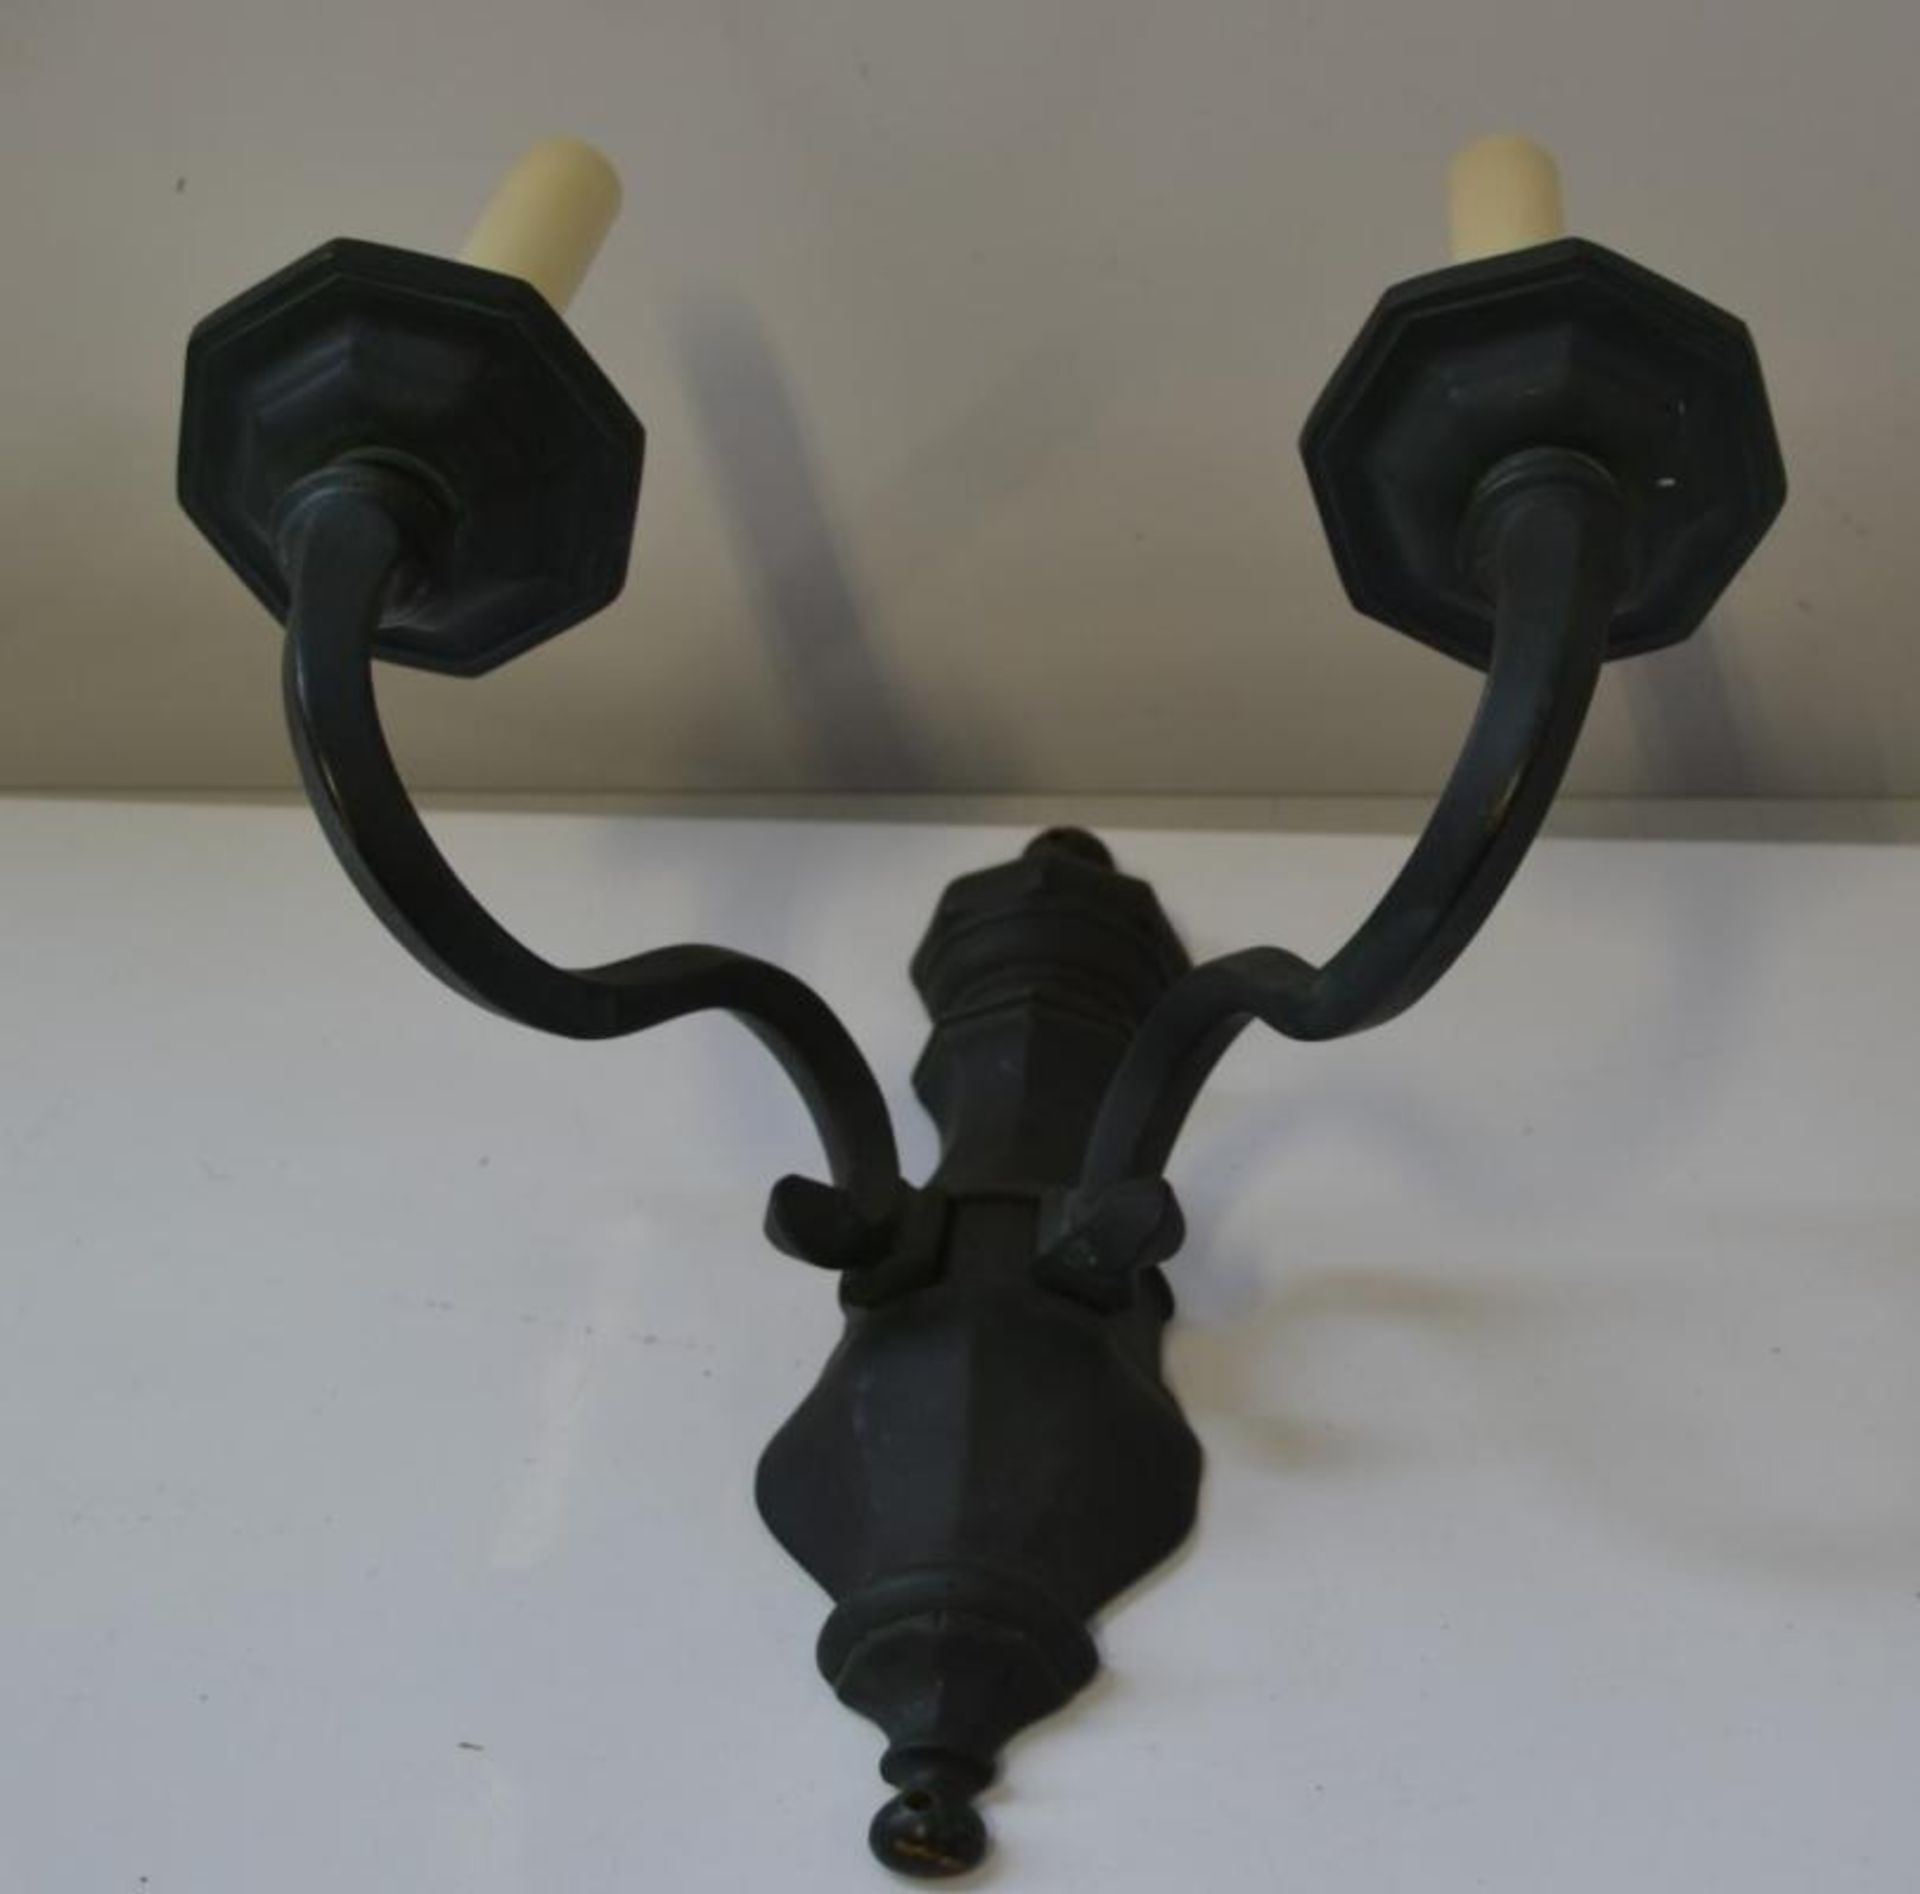 1 x CHELSOM Ornate Wall Light Fitting In Black - Dimensions: H32/L32cm - New/Unused boxed stock - CL - Image 3 of 3